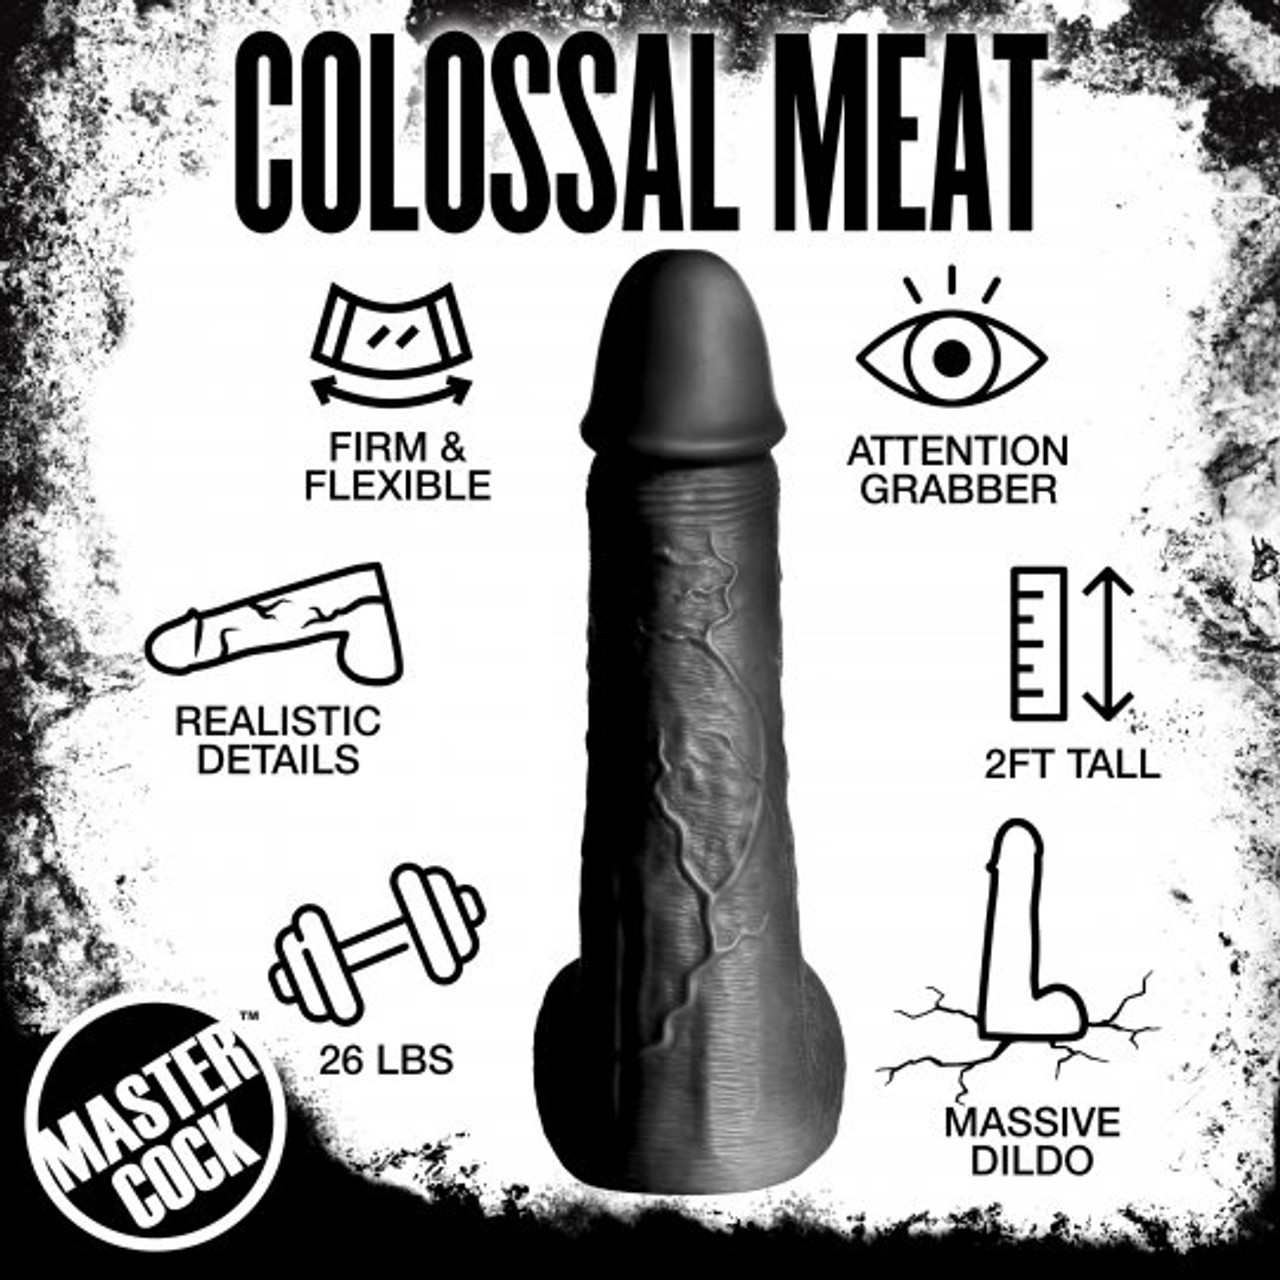 Master Cock Moby The Huge 36 Inch Tall Super Dildo, Black